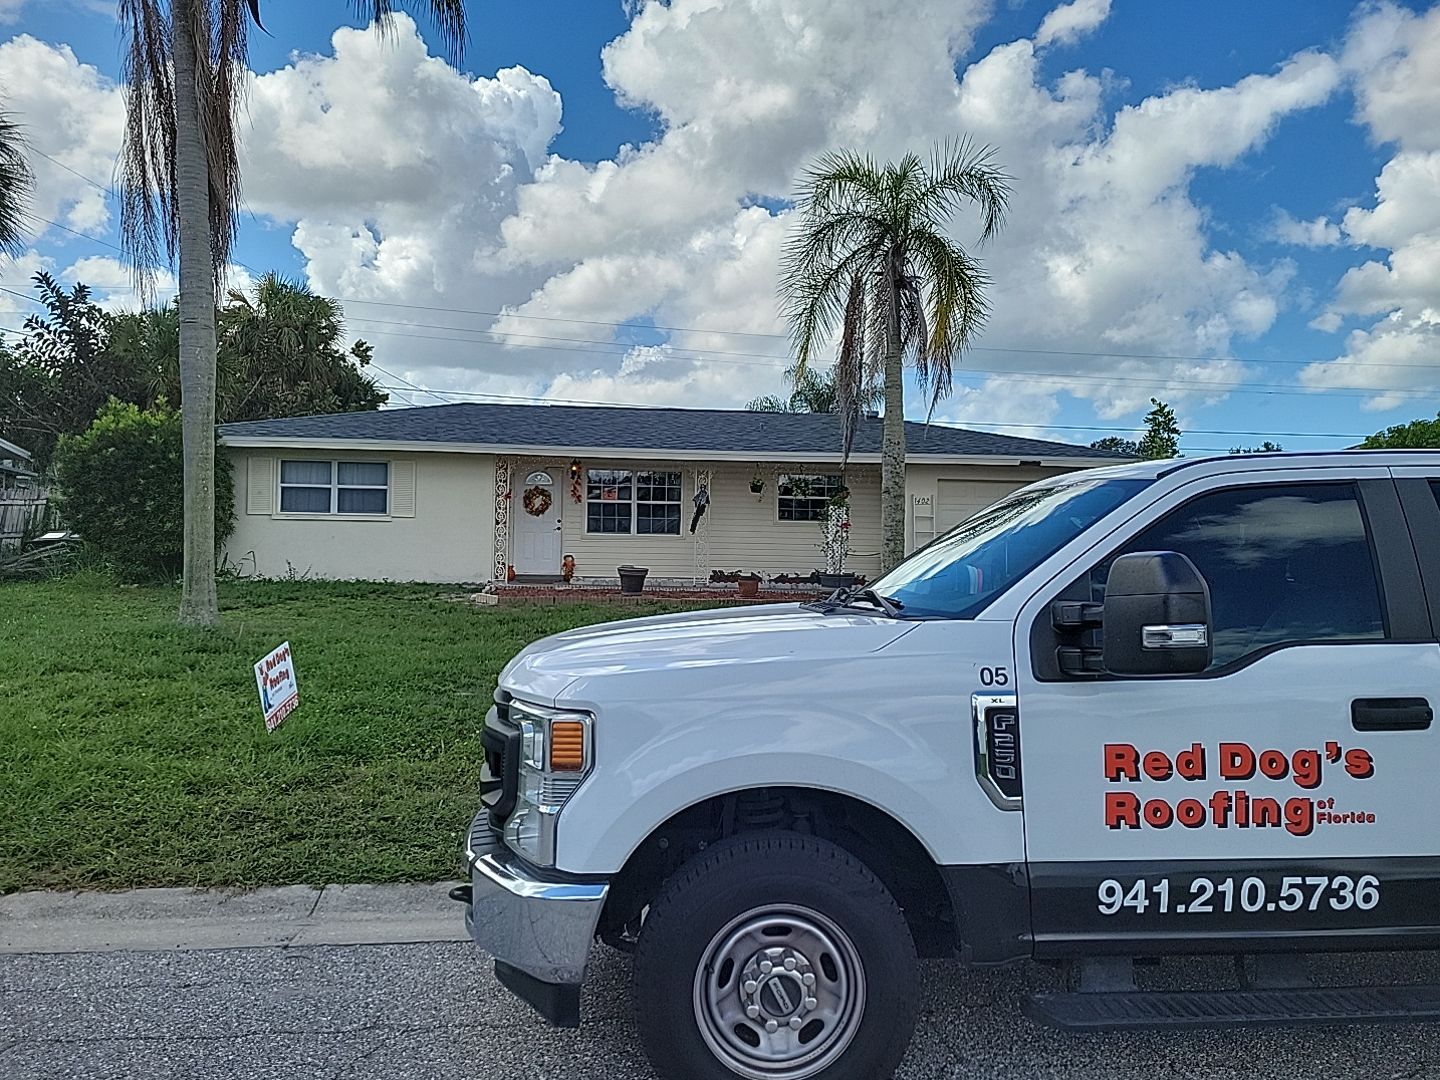 Red Dog's Roofing of Florida